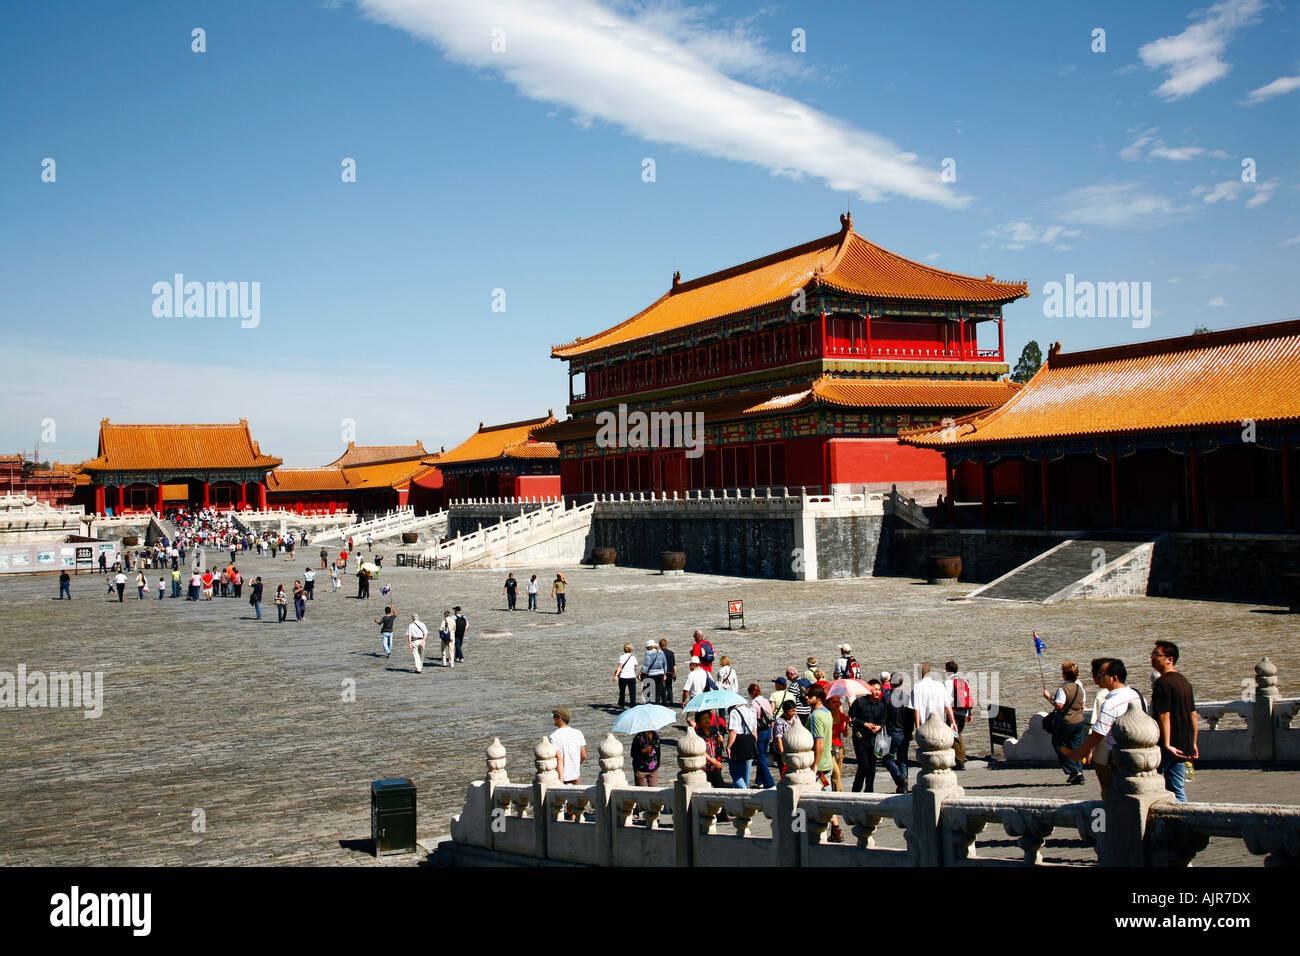 People at the Forbidden city Beijing China Stock Photo